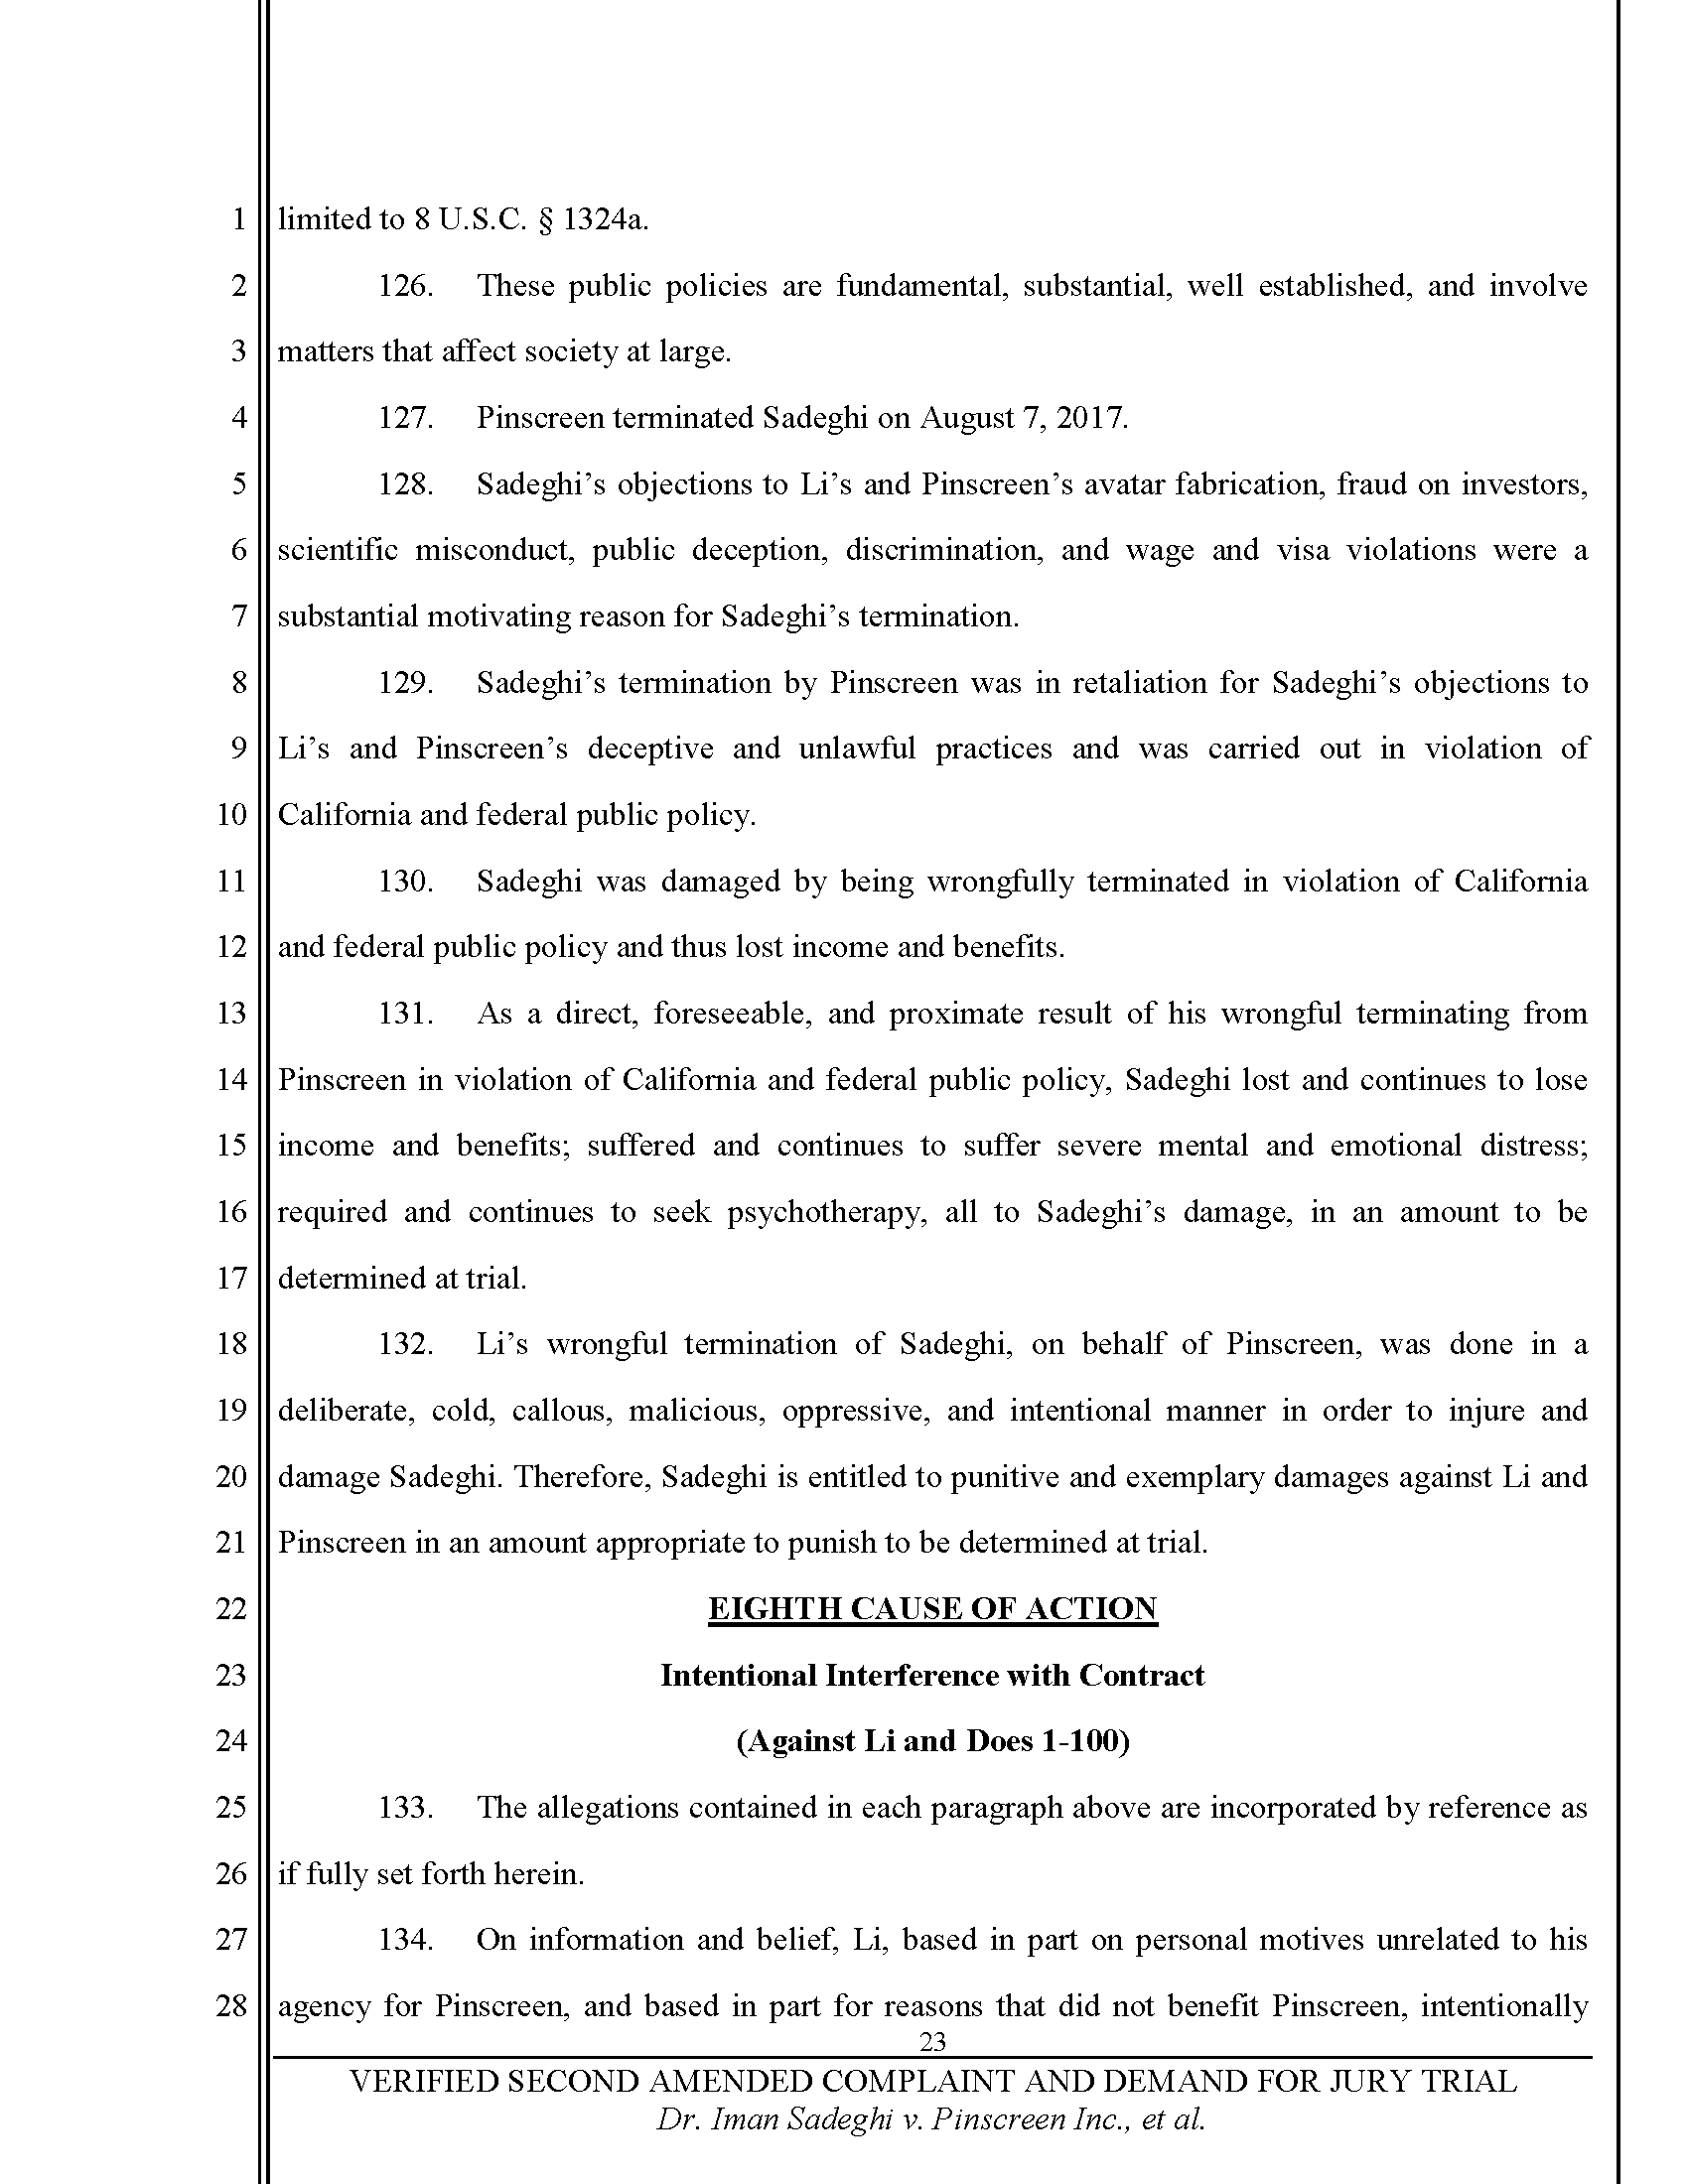 Second Amended Complaint (SAC) Page 24